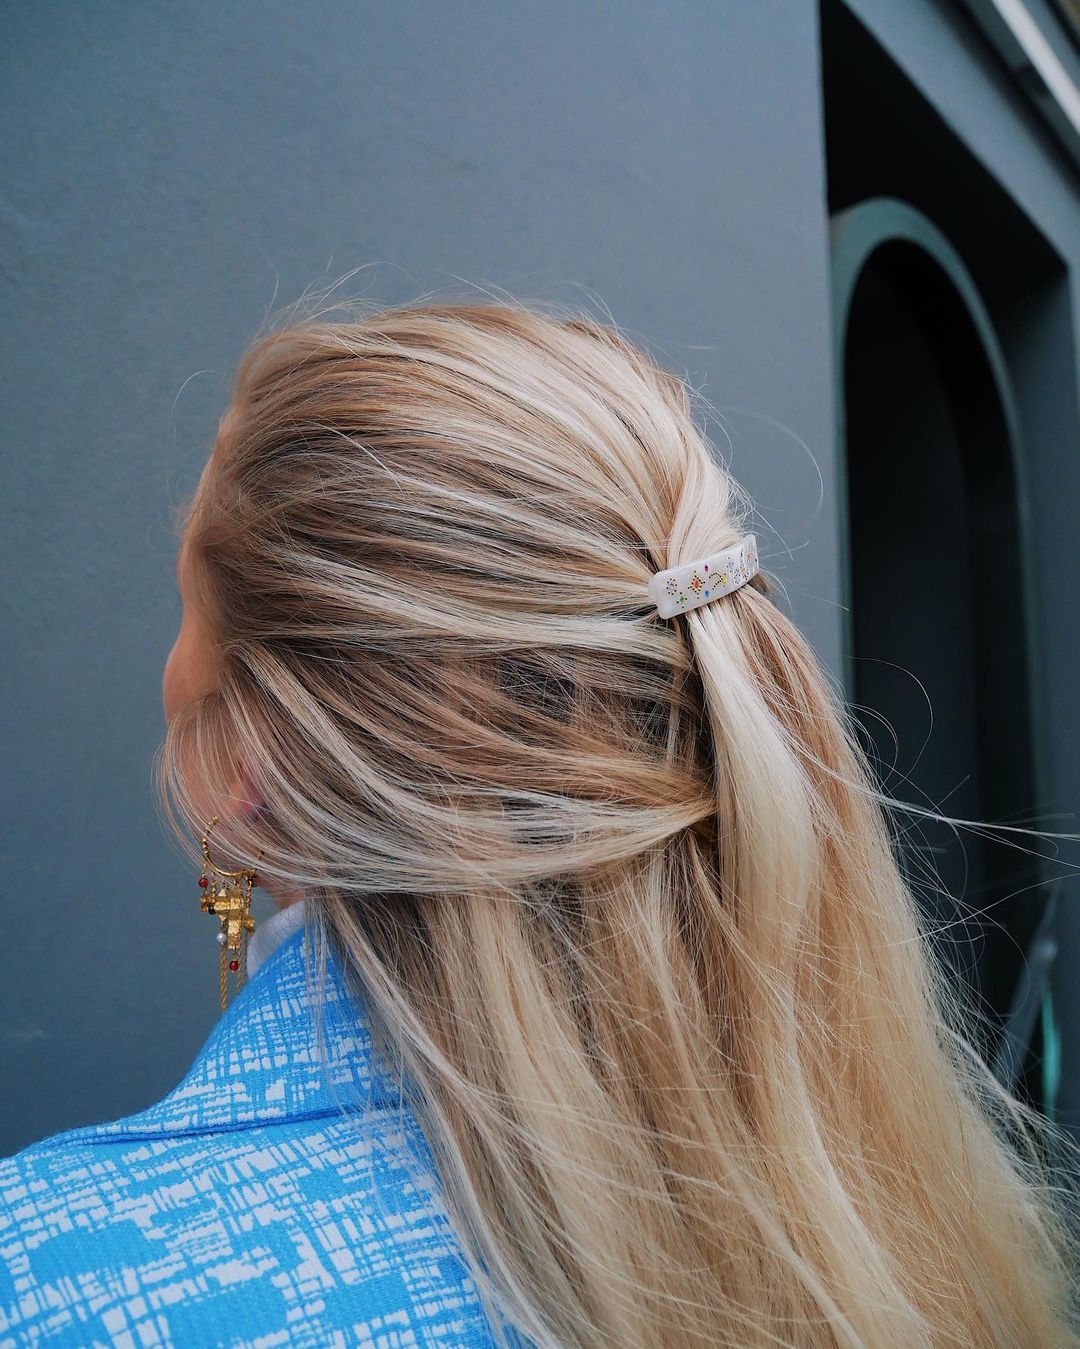 Half up half down hairstyle with hair clip: @andreasteen